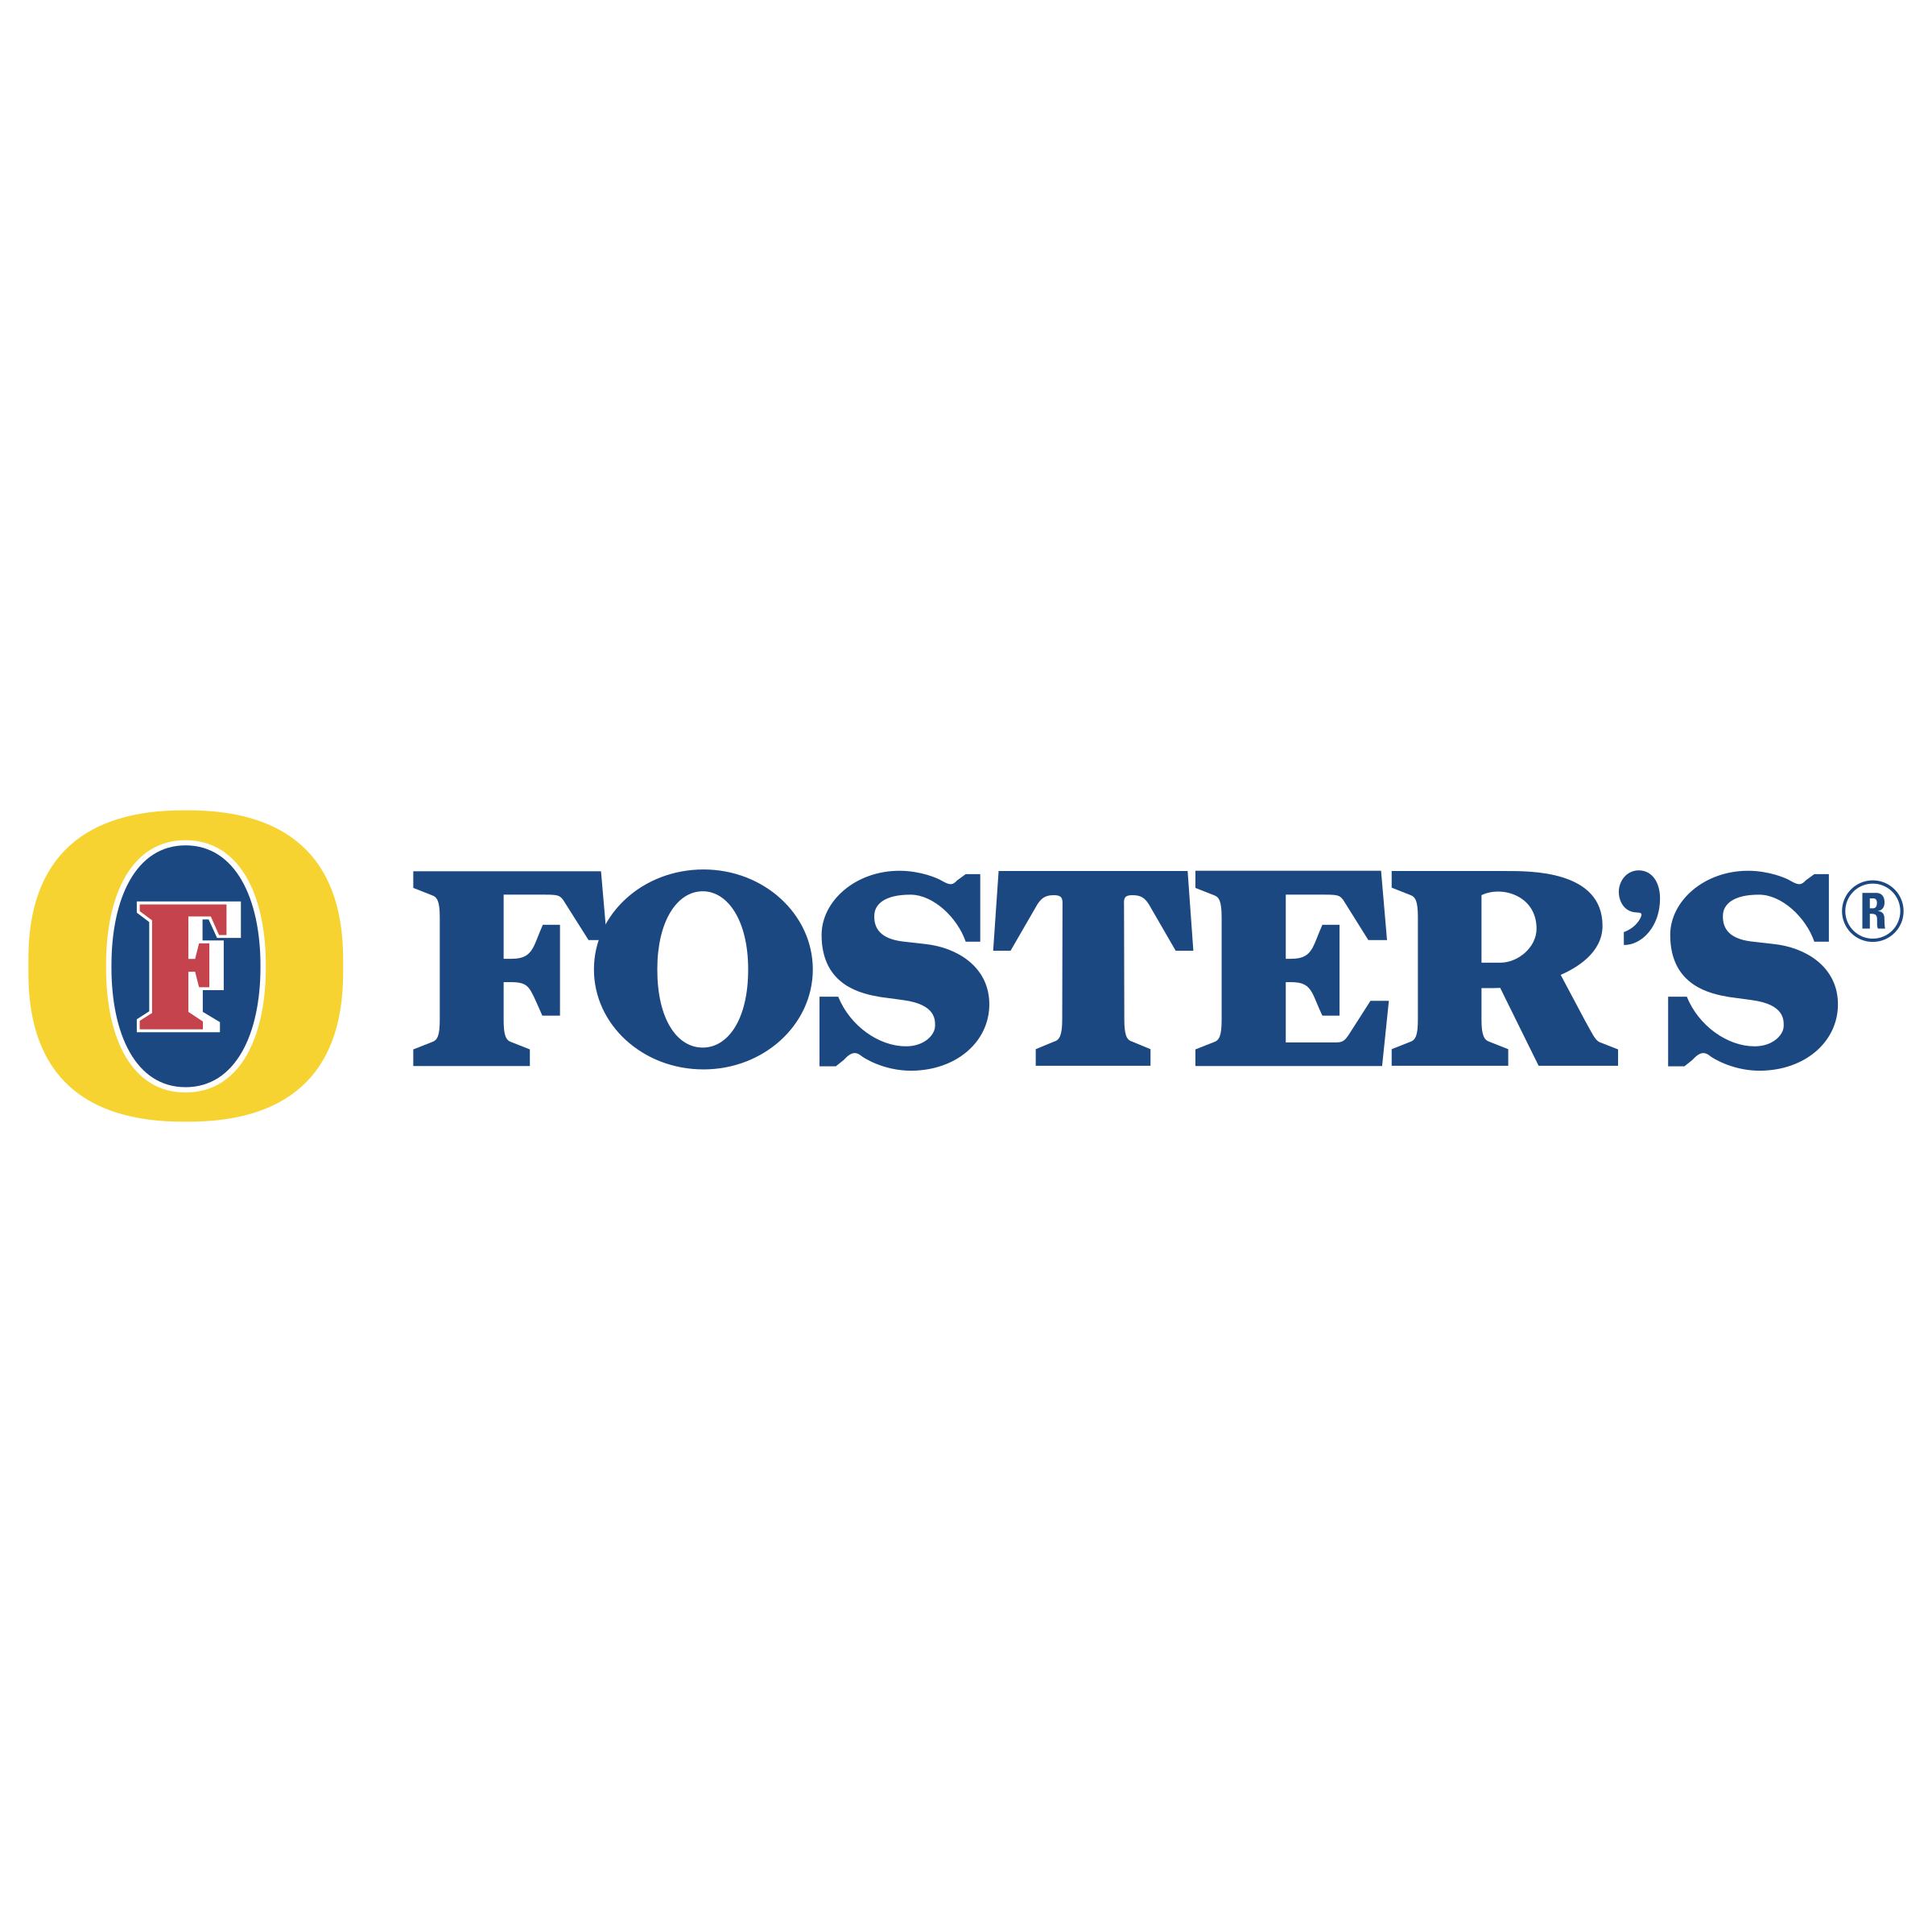 Fosters Logo - Foster's Logo PNG Transparent & SVG Vector - Freebie Supply